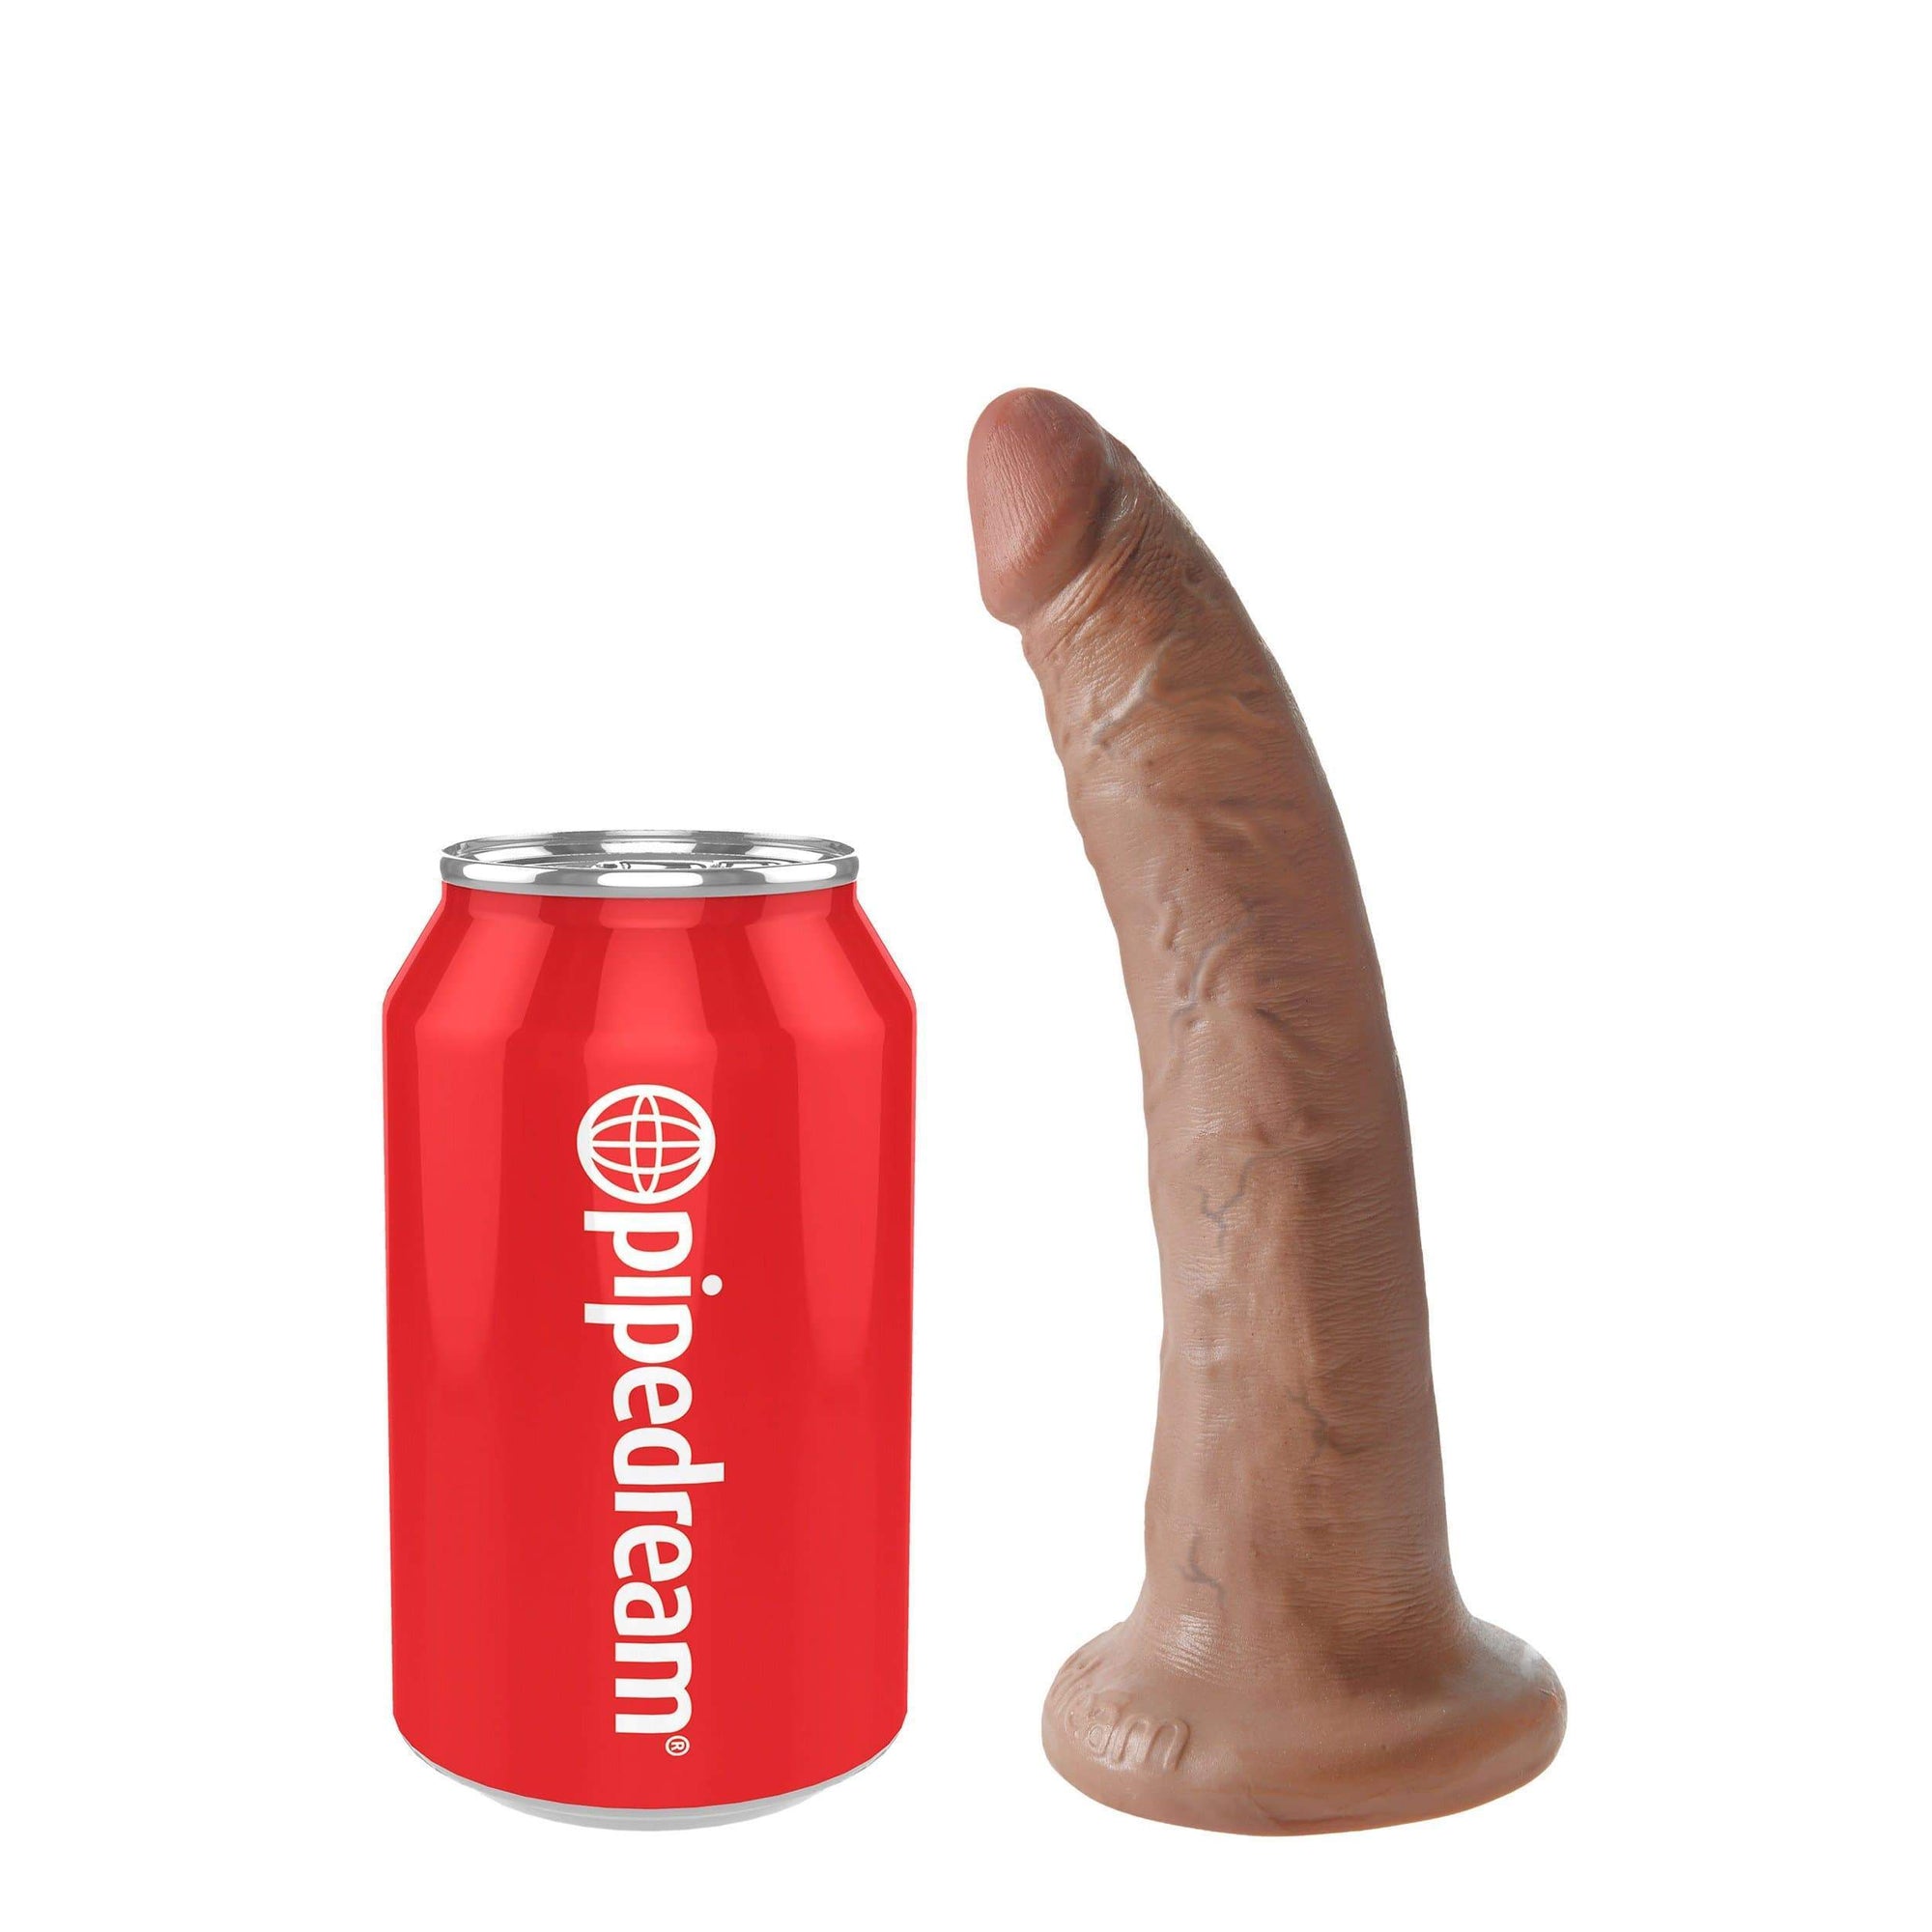 Pipedream - King Cock Dildo 7" (Brown) Realistic Dildo with suction cup (Non Vibration) 603912746310 CherryAffairs